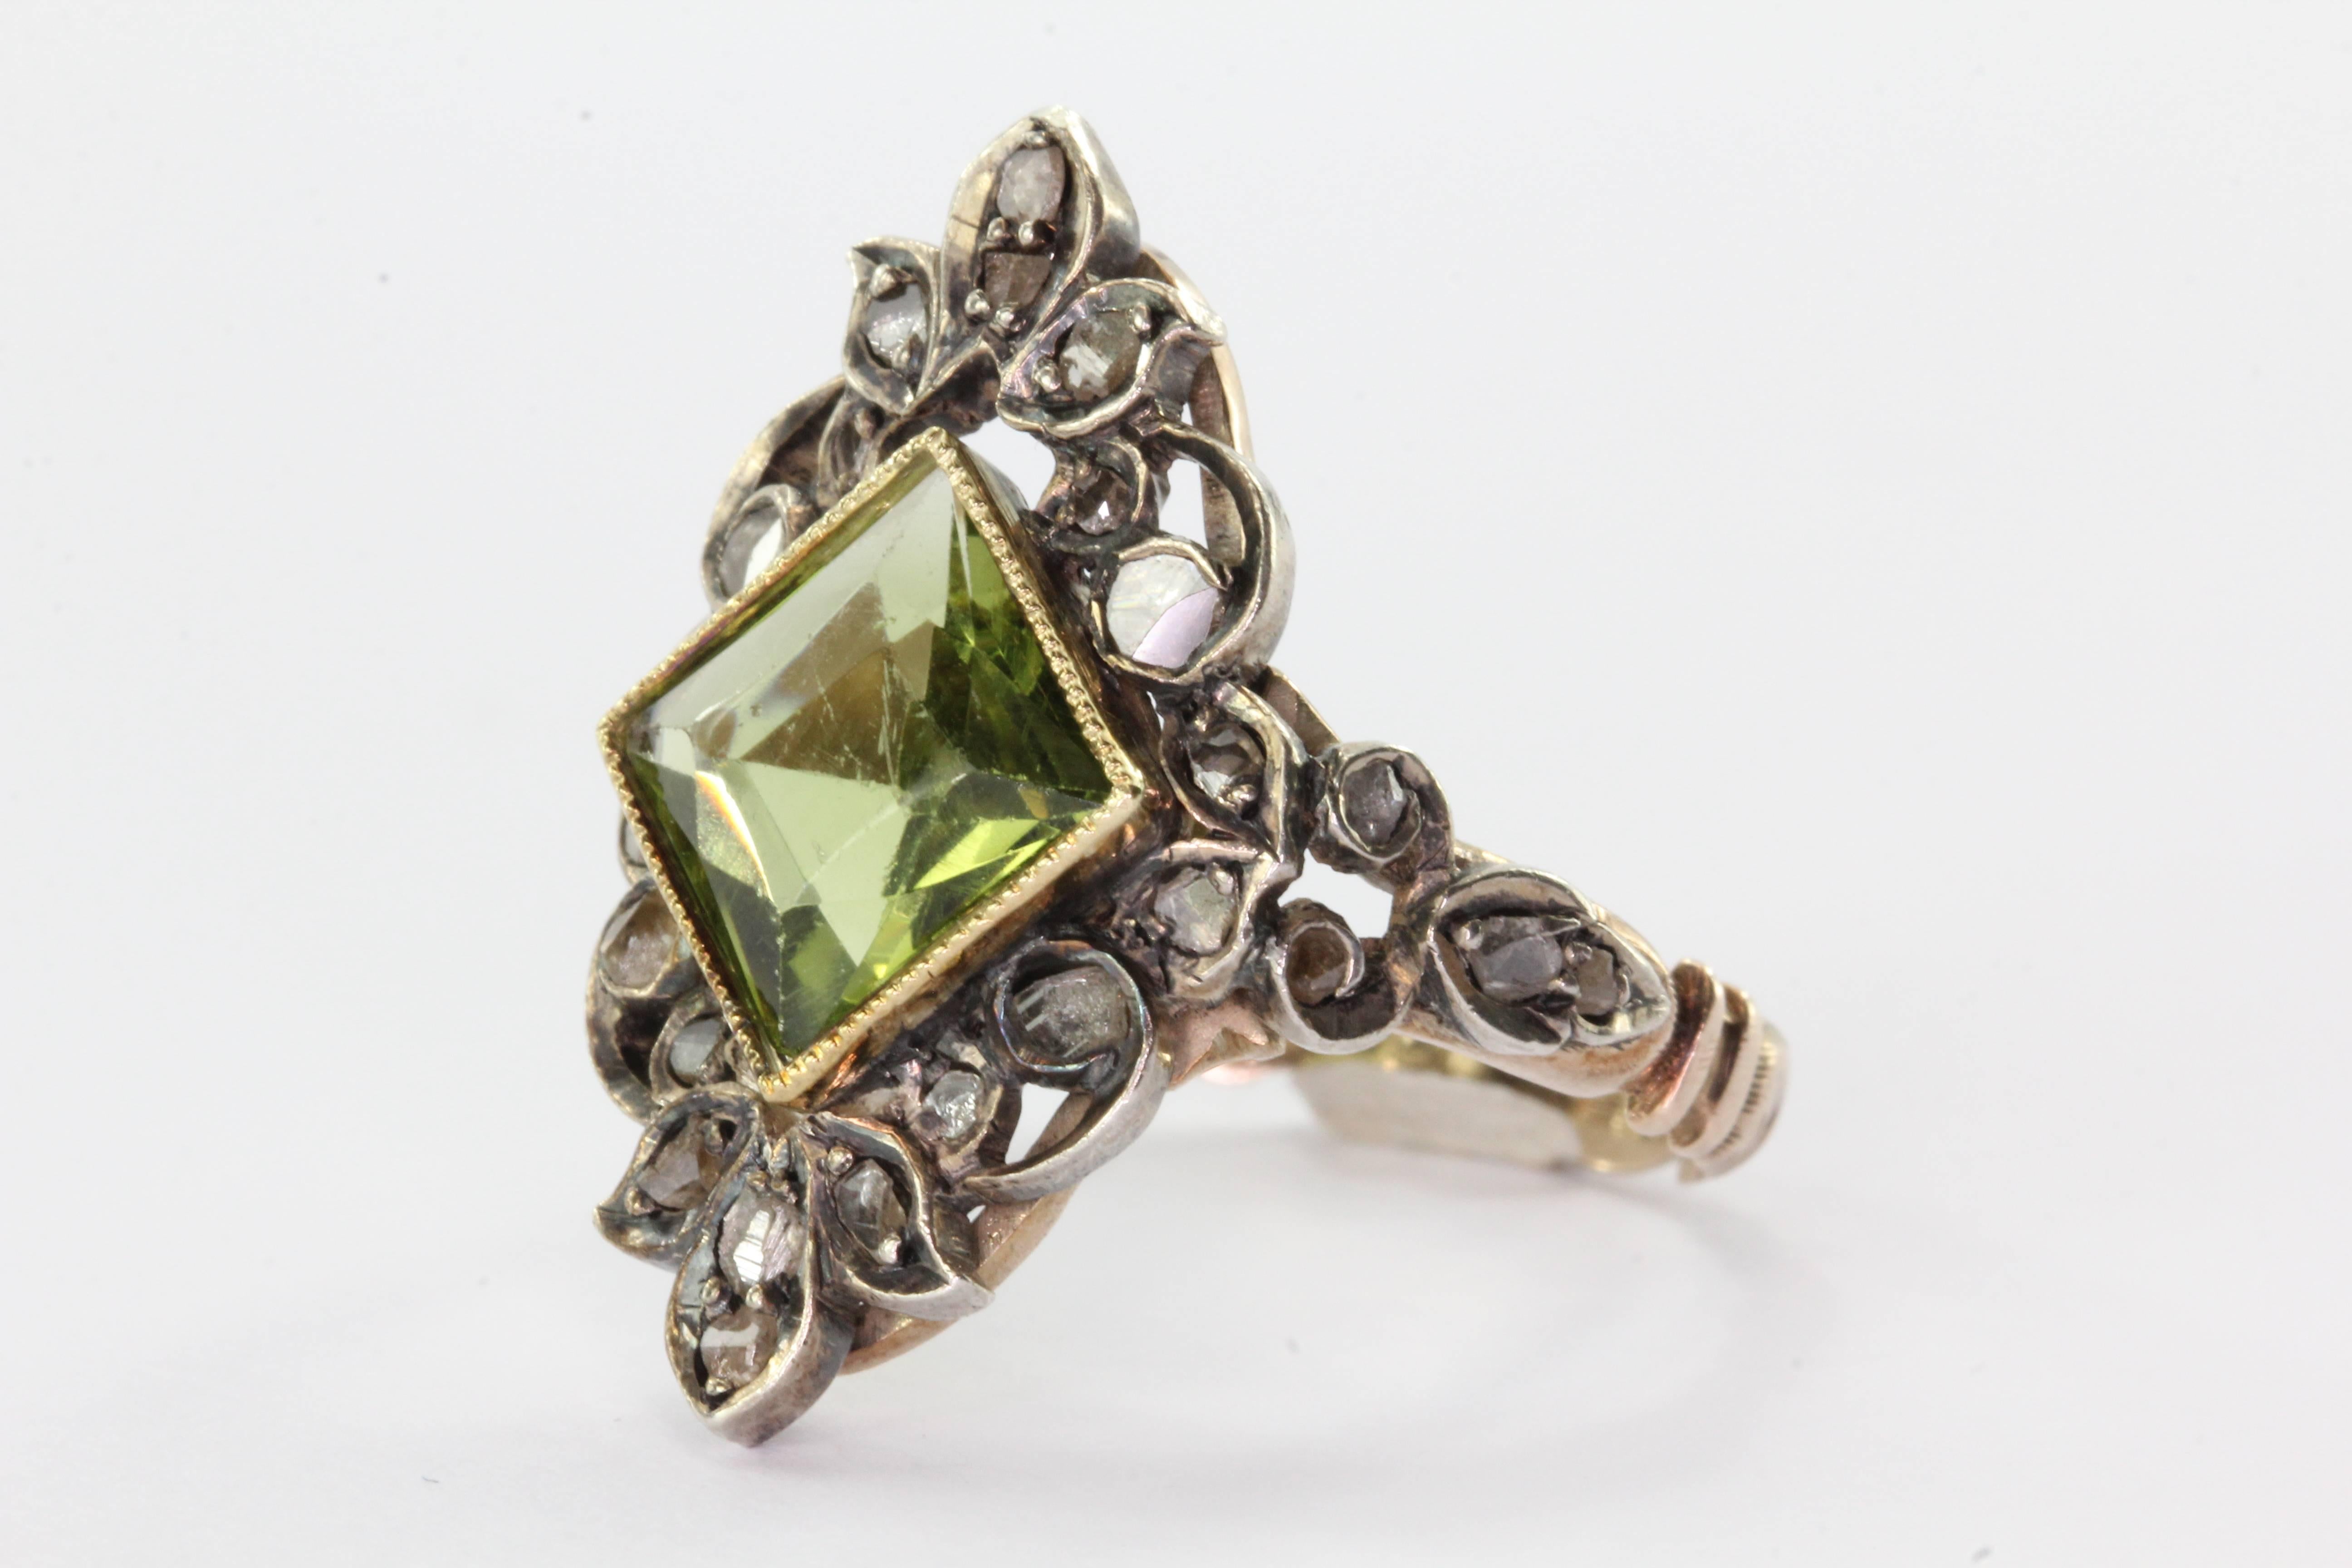 Antique Georgian Rose Cut Diamond Gold & Silver Green Paste Ring. The ring is in excellent estate condition and ready to wear. There is some wear to the paste stone but the rest of the ring is perfect. The shank, band and paste mounting are 9ct